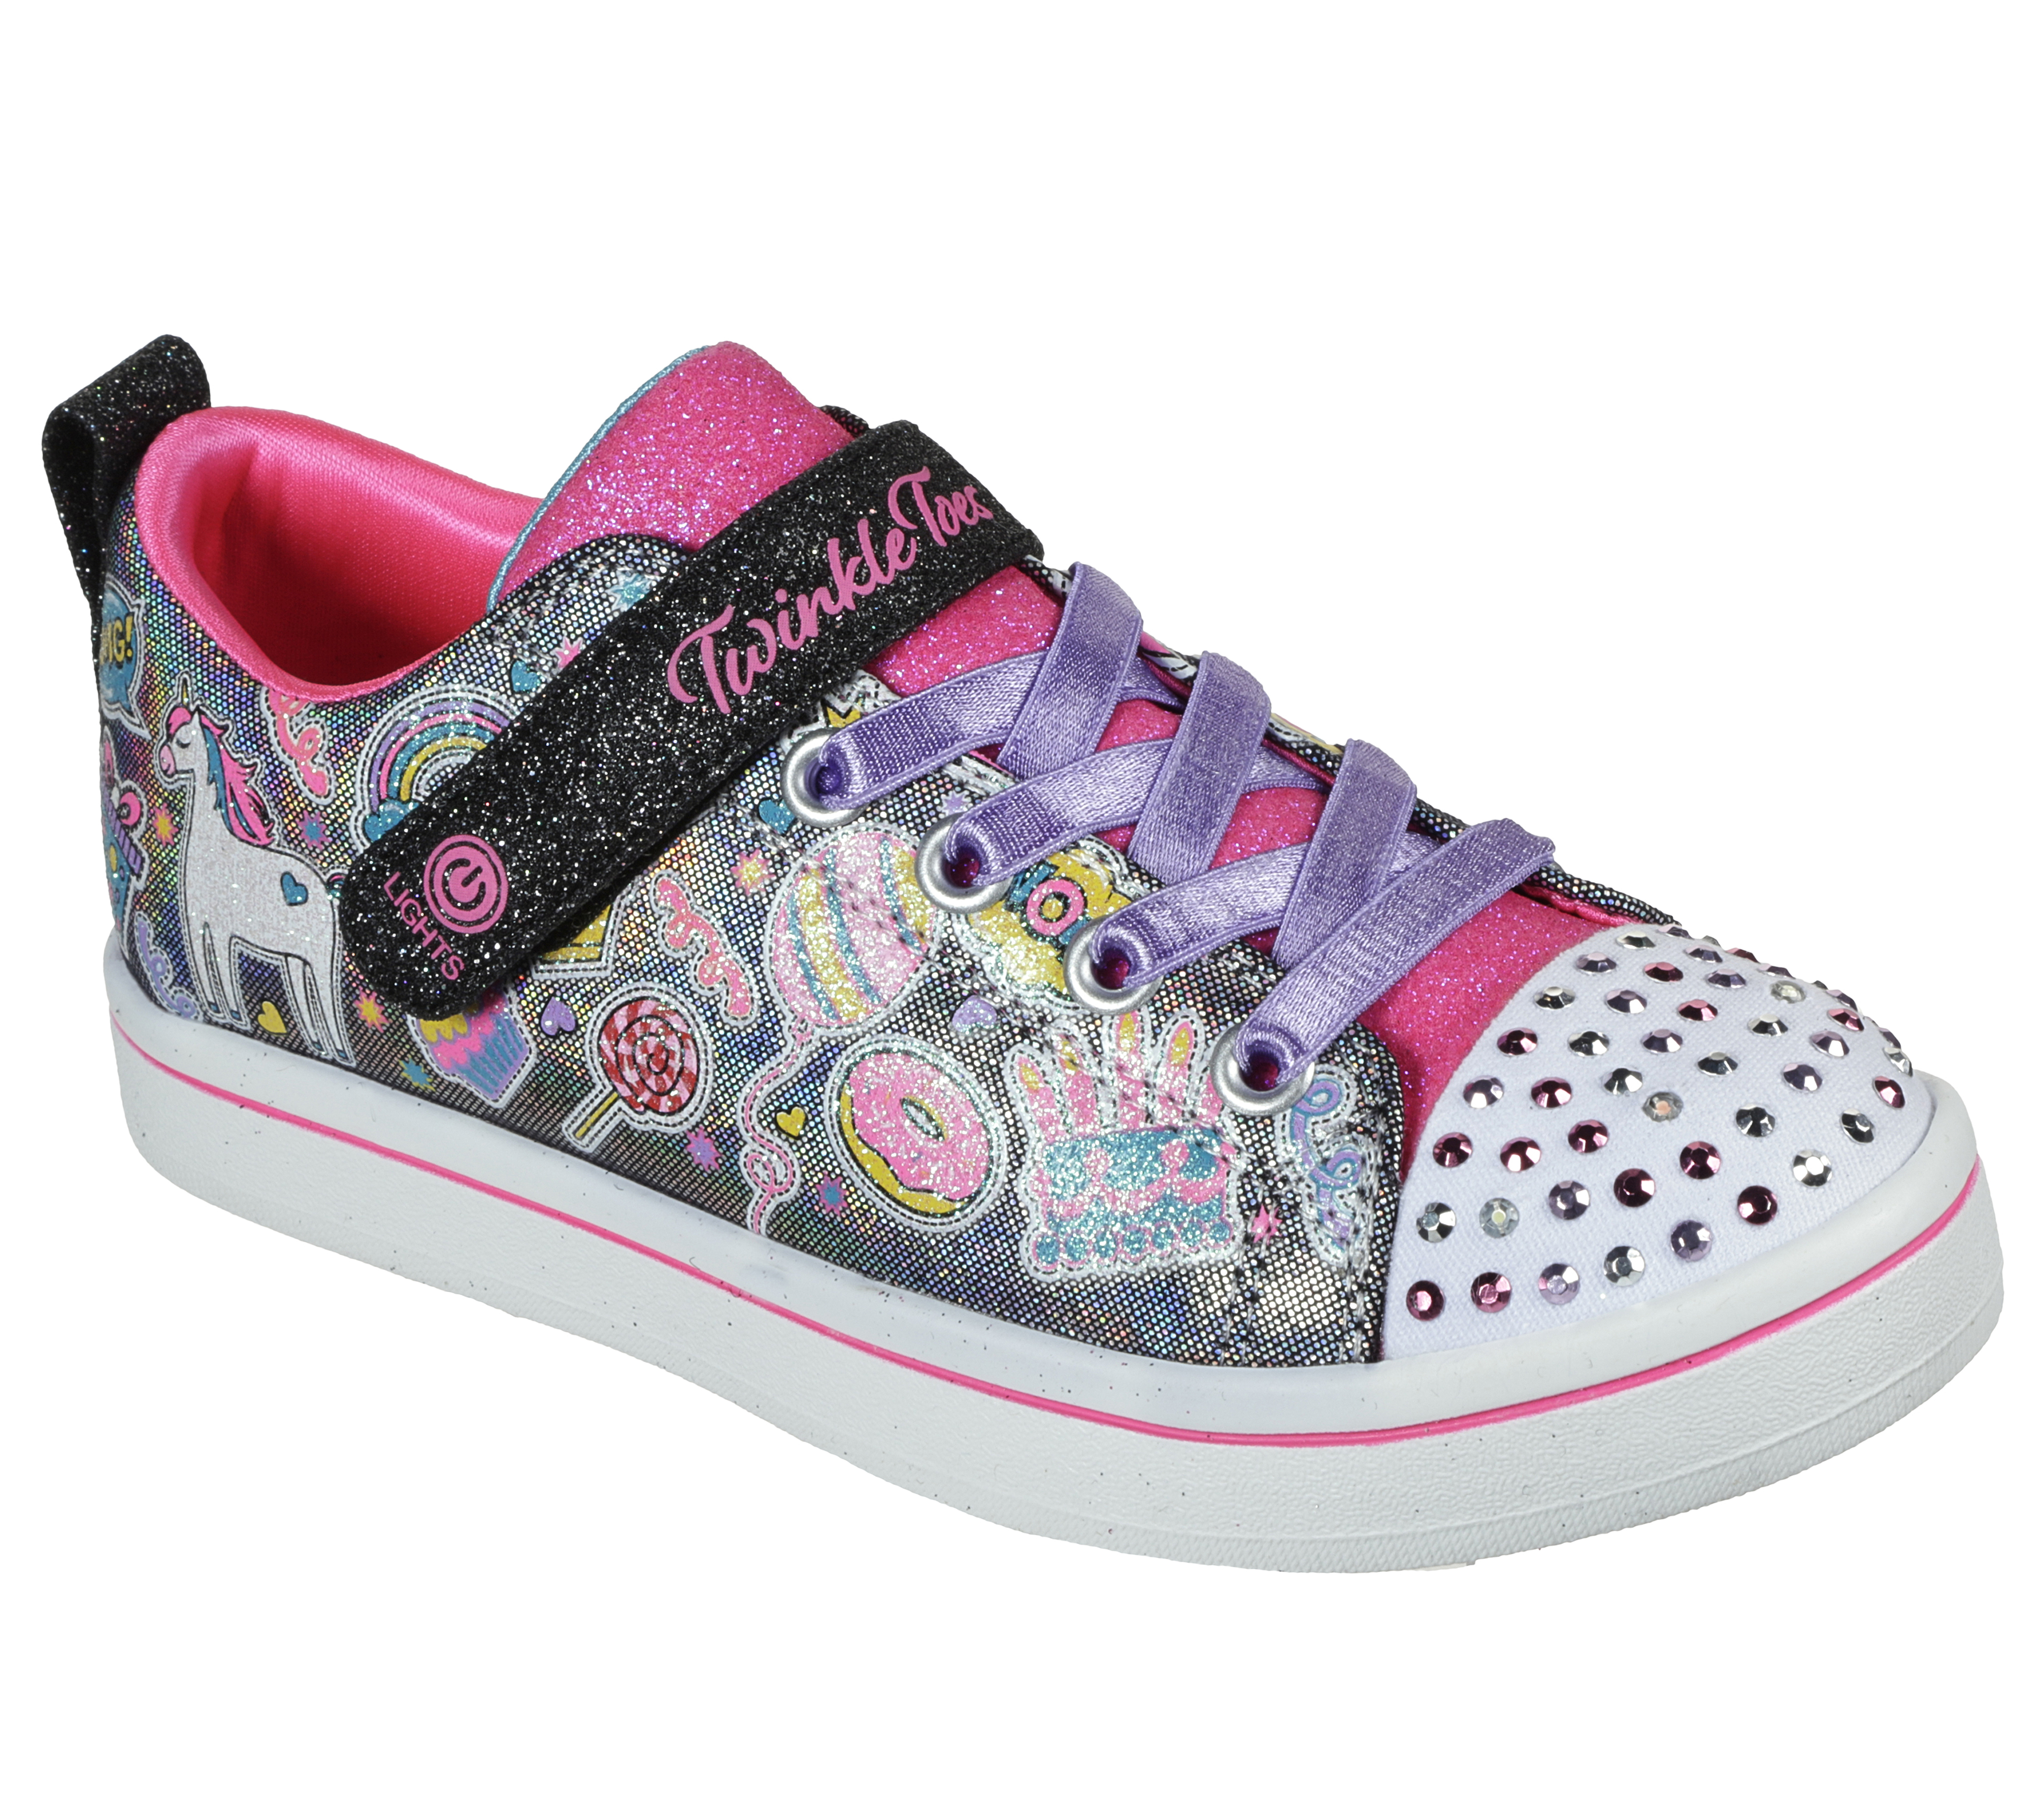 Shop the Twinkle Toes: Sparkle Rayz 